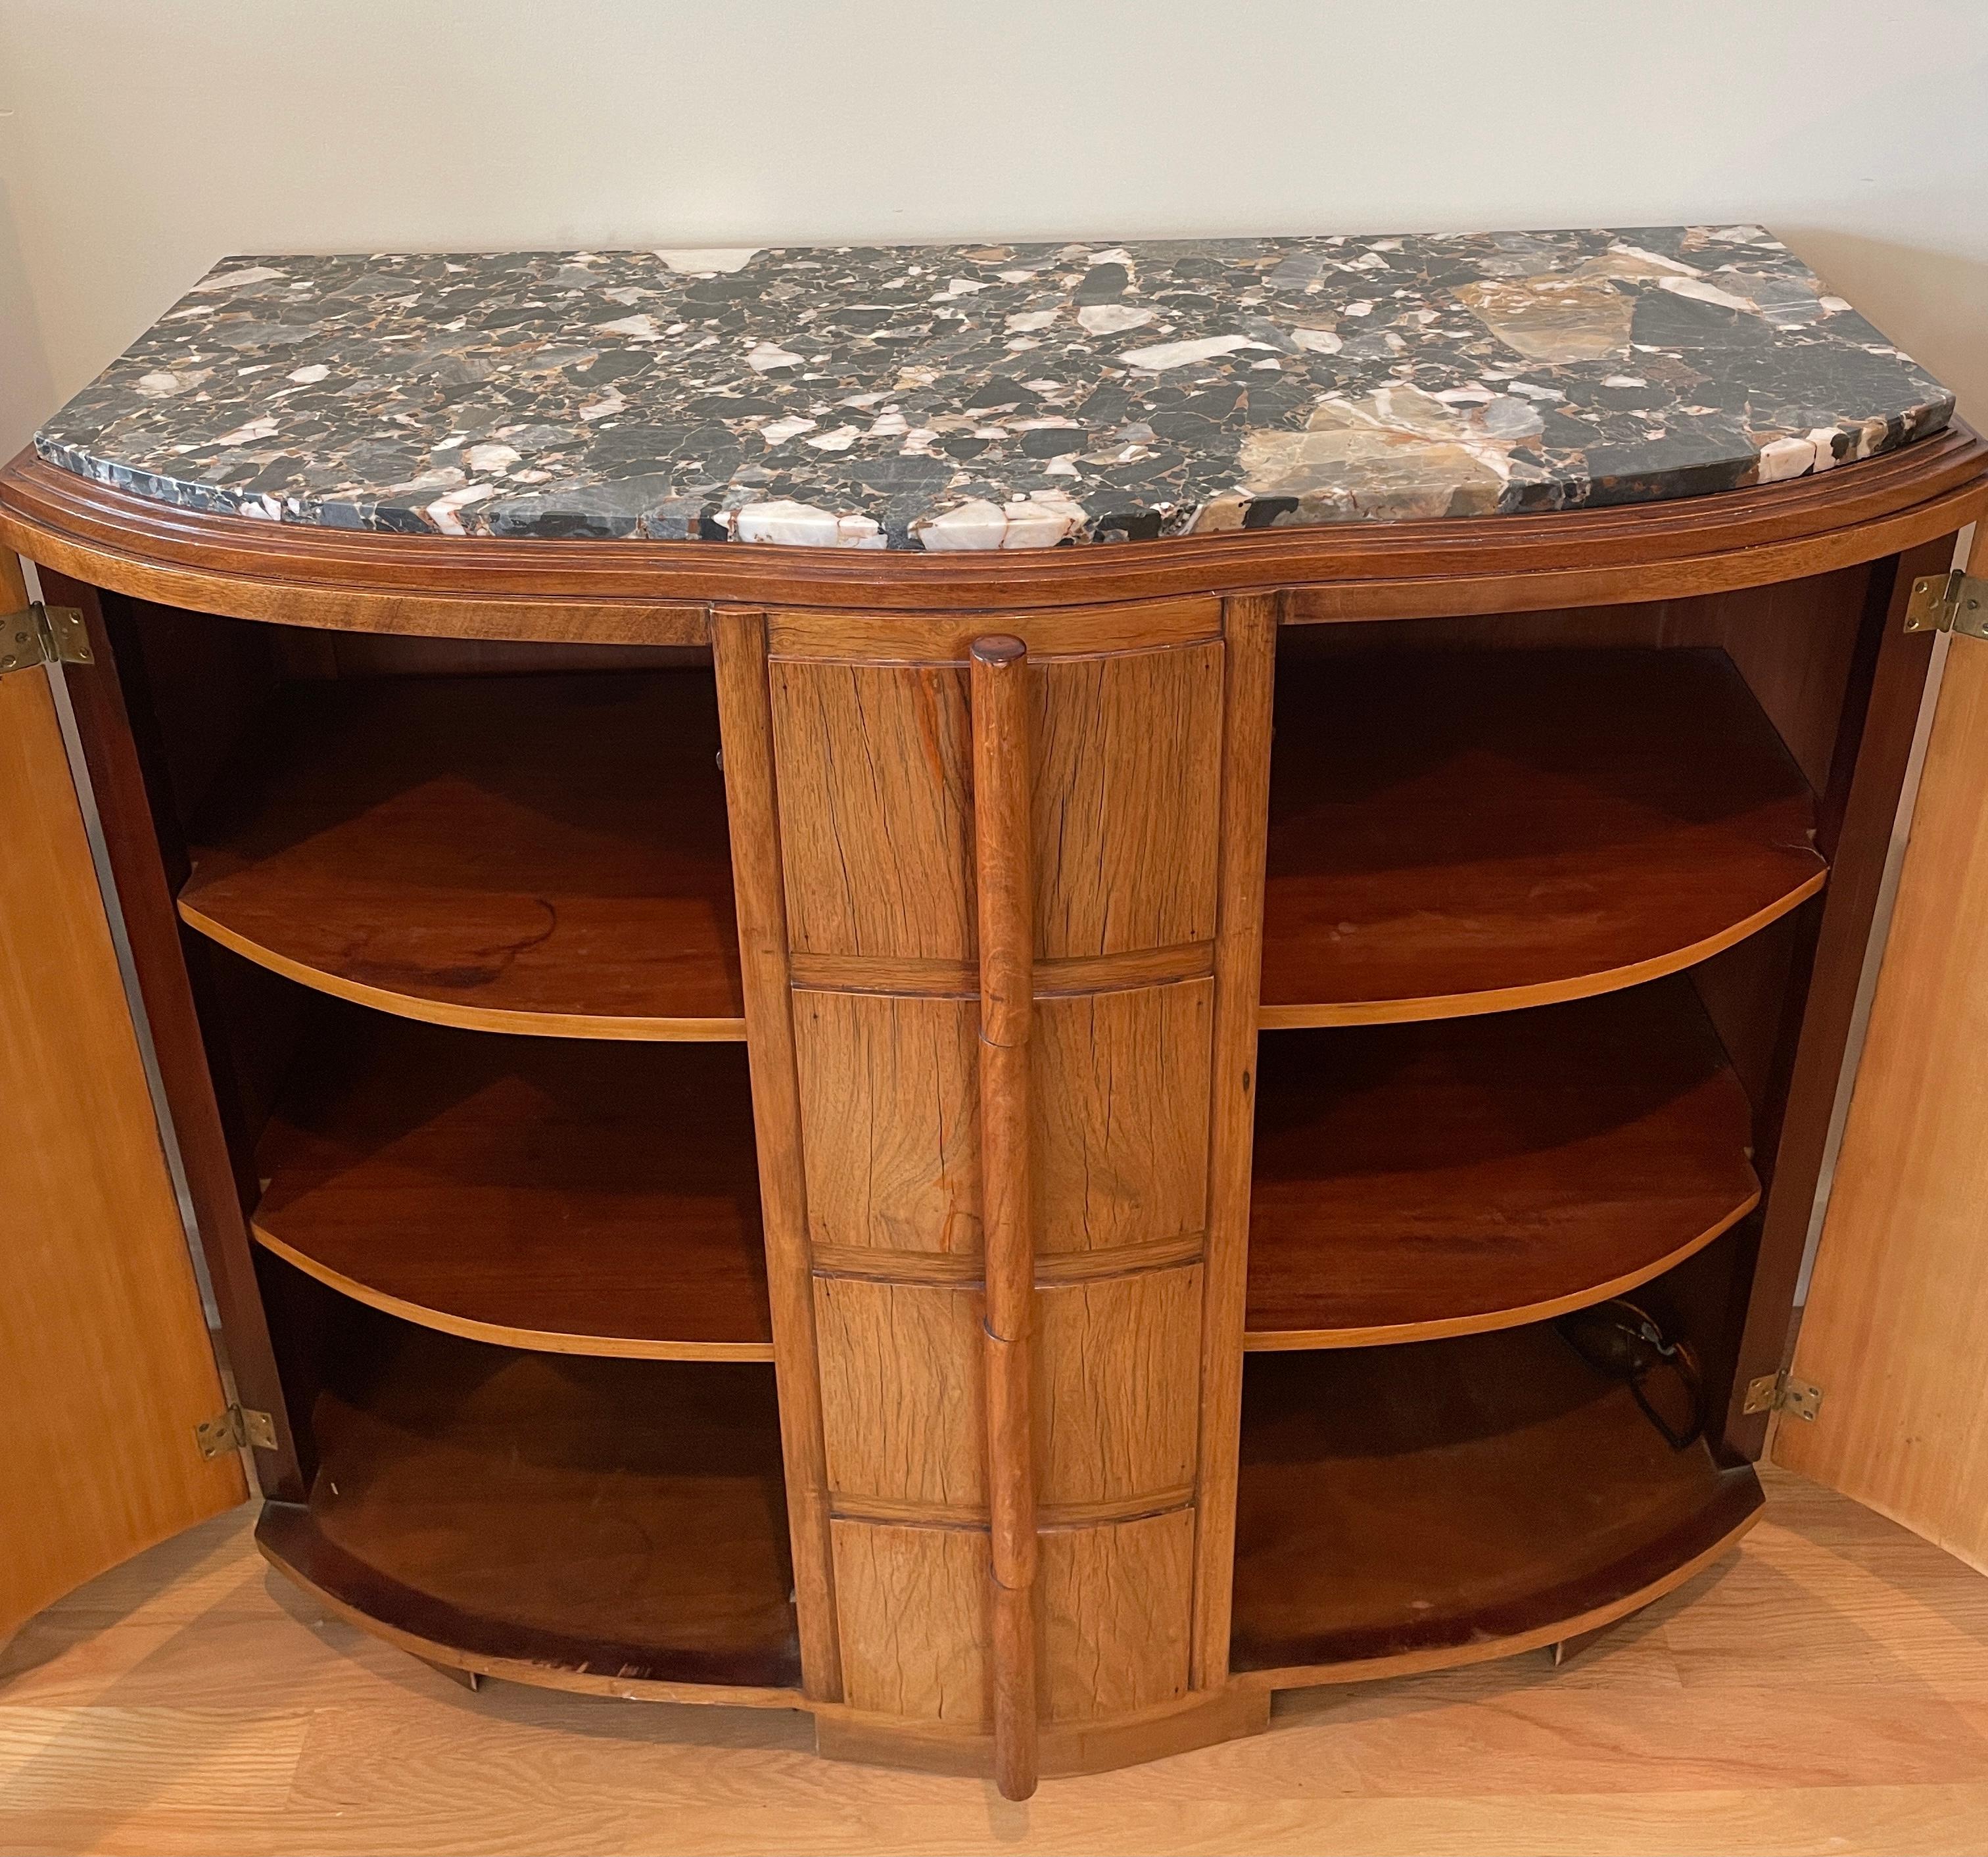 French Art Deco Marble Top Buffet